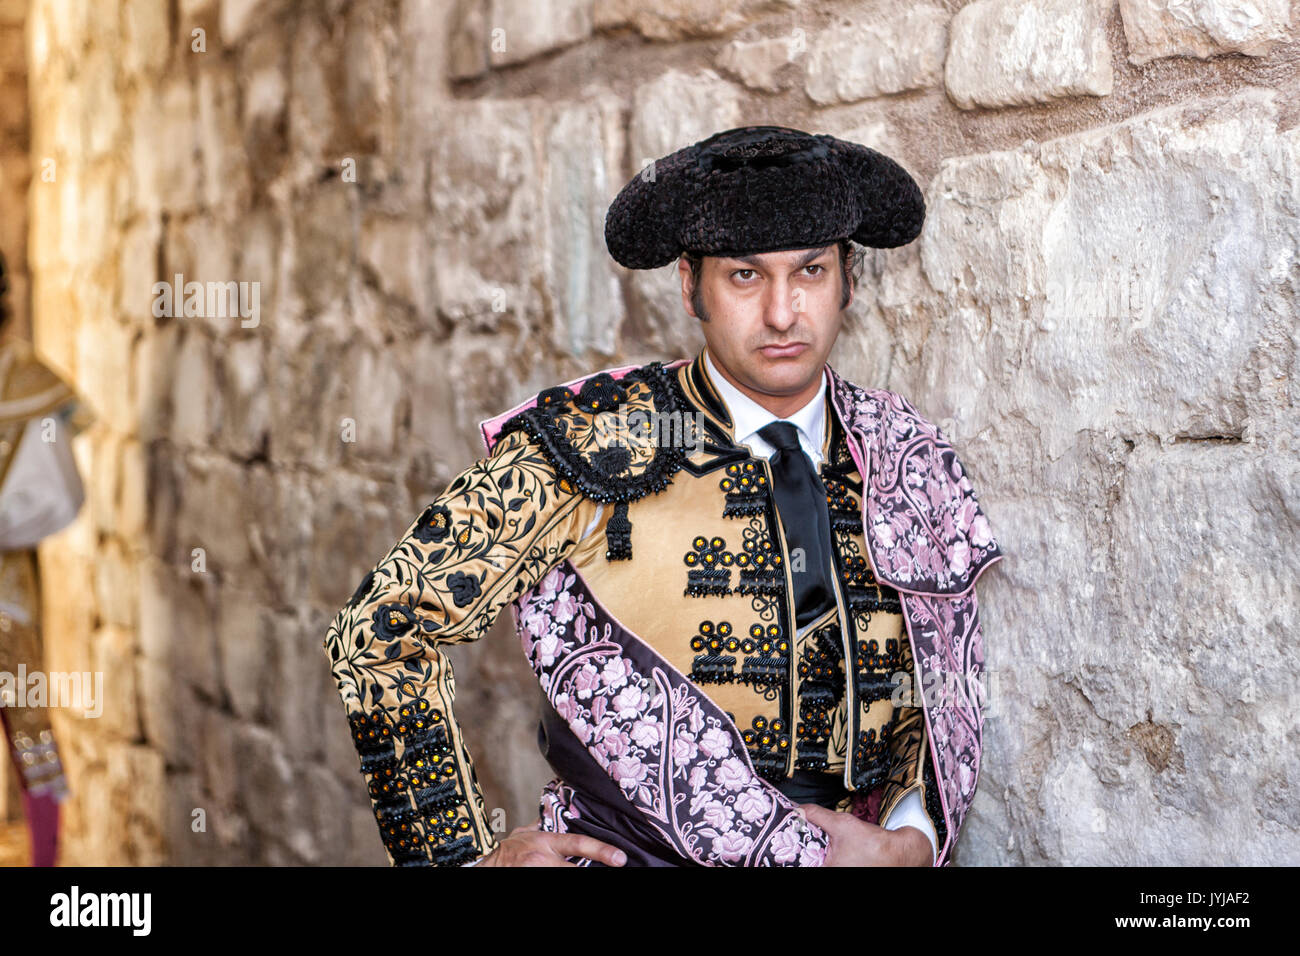 Spanish bullfighter Morante de la Puebla concentrated on the alley minutes before going out to initiate the paseillo in Ubeda bullring, Jaen, Spain Stock Photo